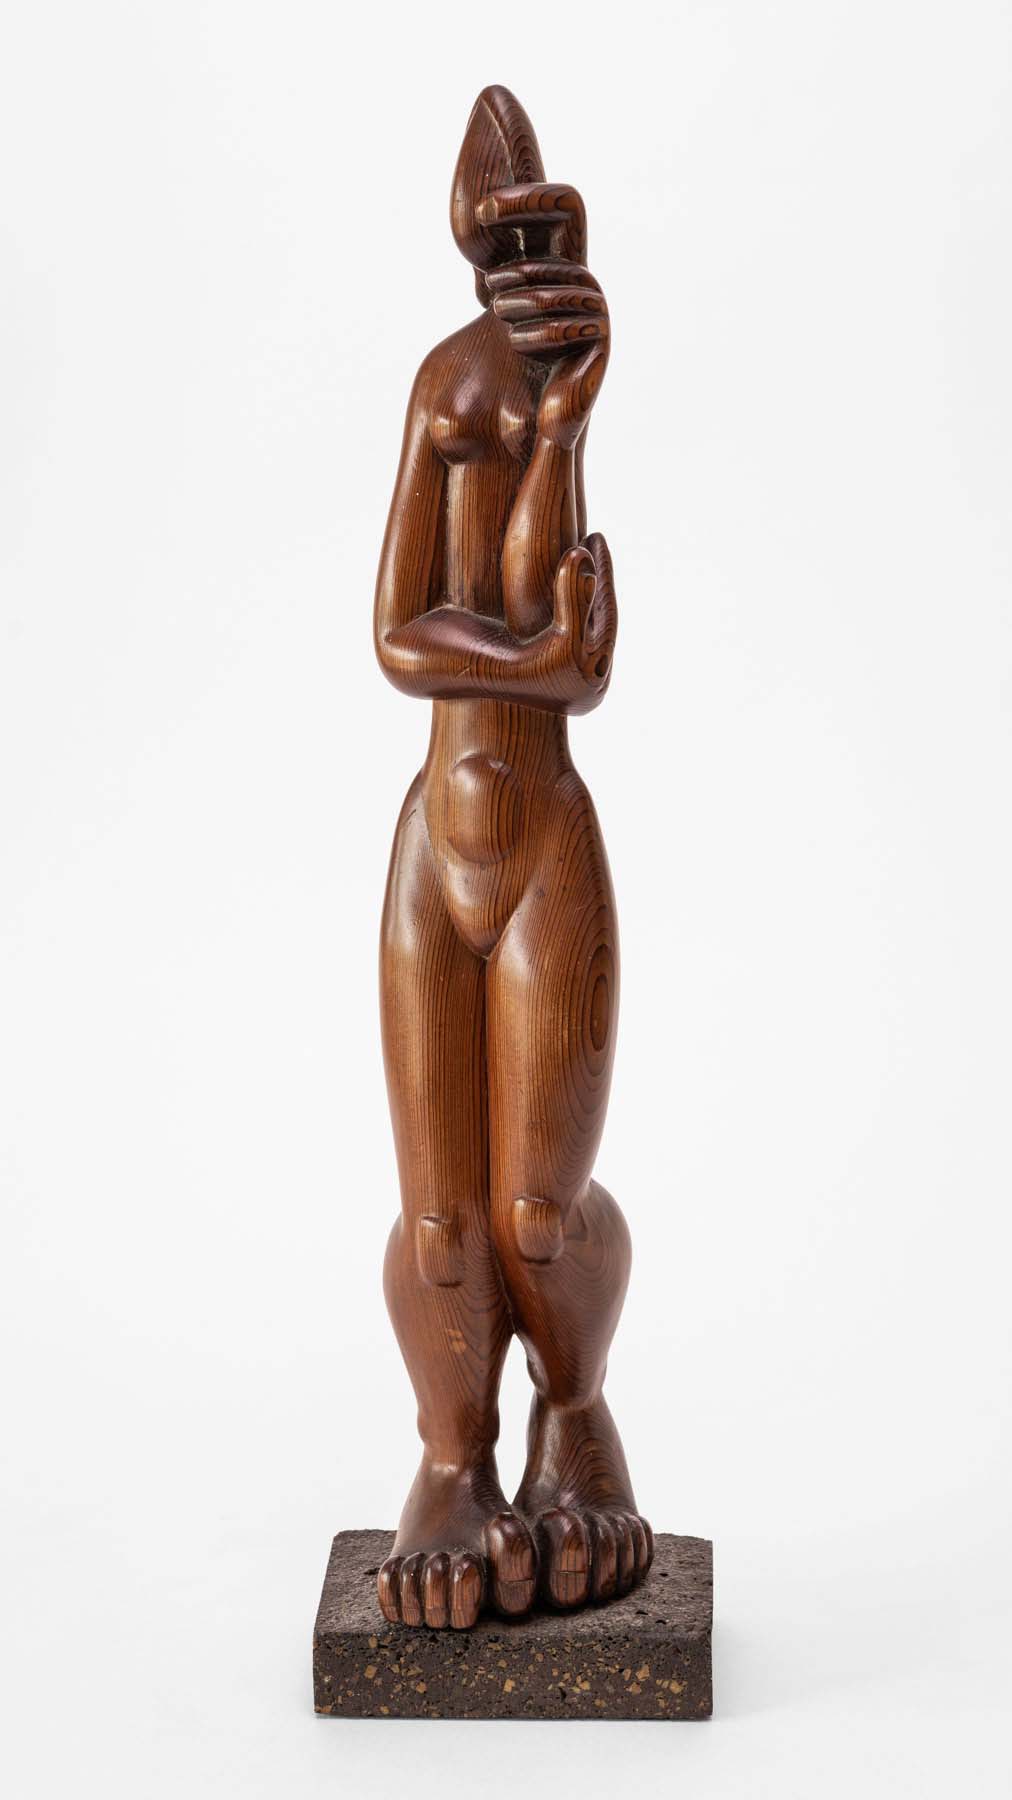 A carved wood sculpture of a bulbous, naked standing figure with very abstract features.